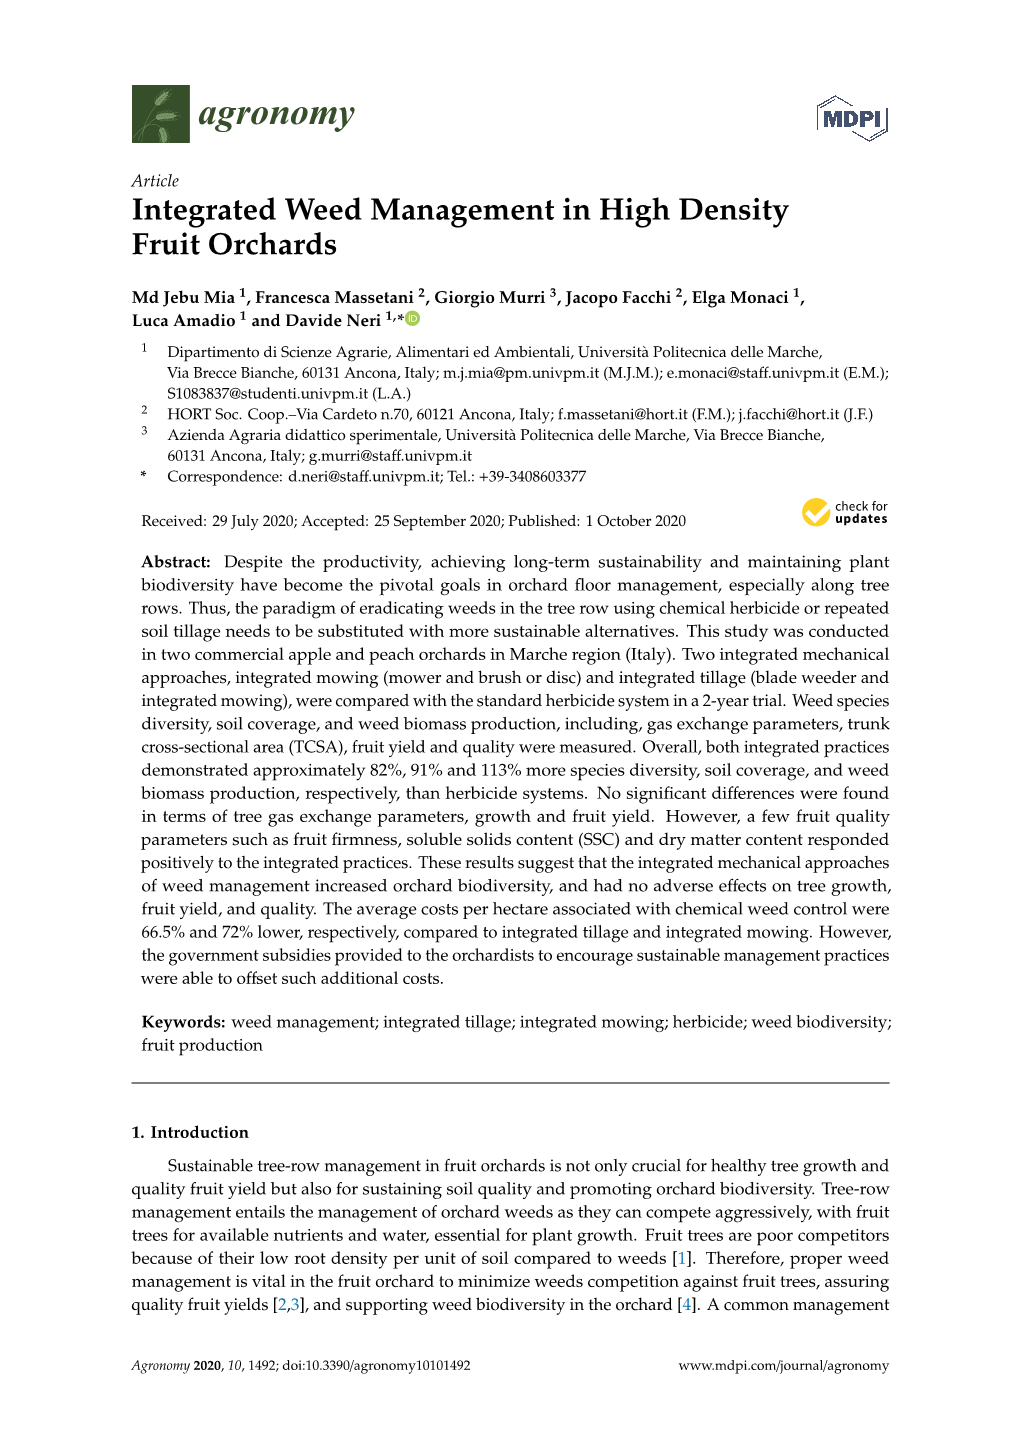 Integrated Weed Management in High Density Fruit Orchards